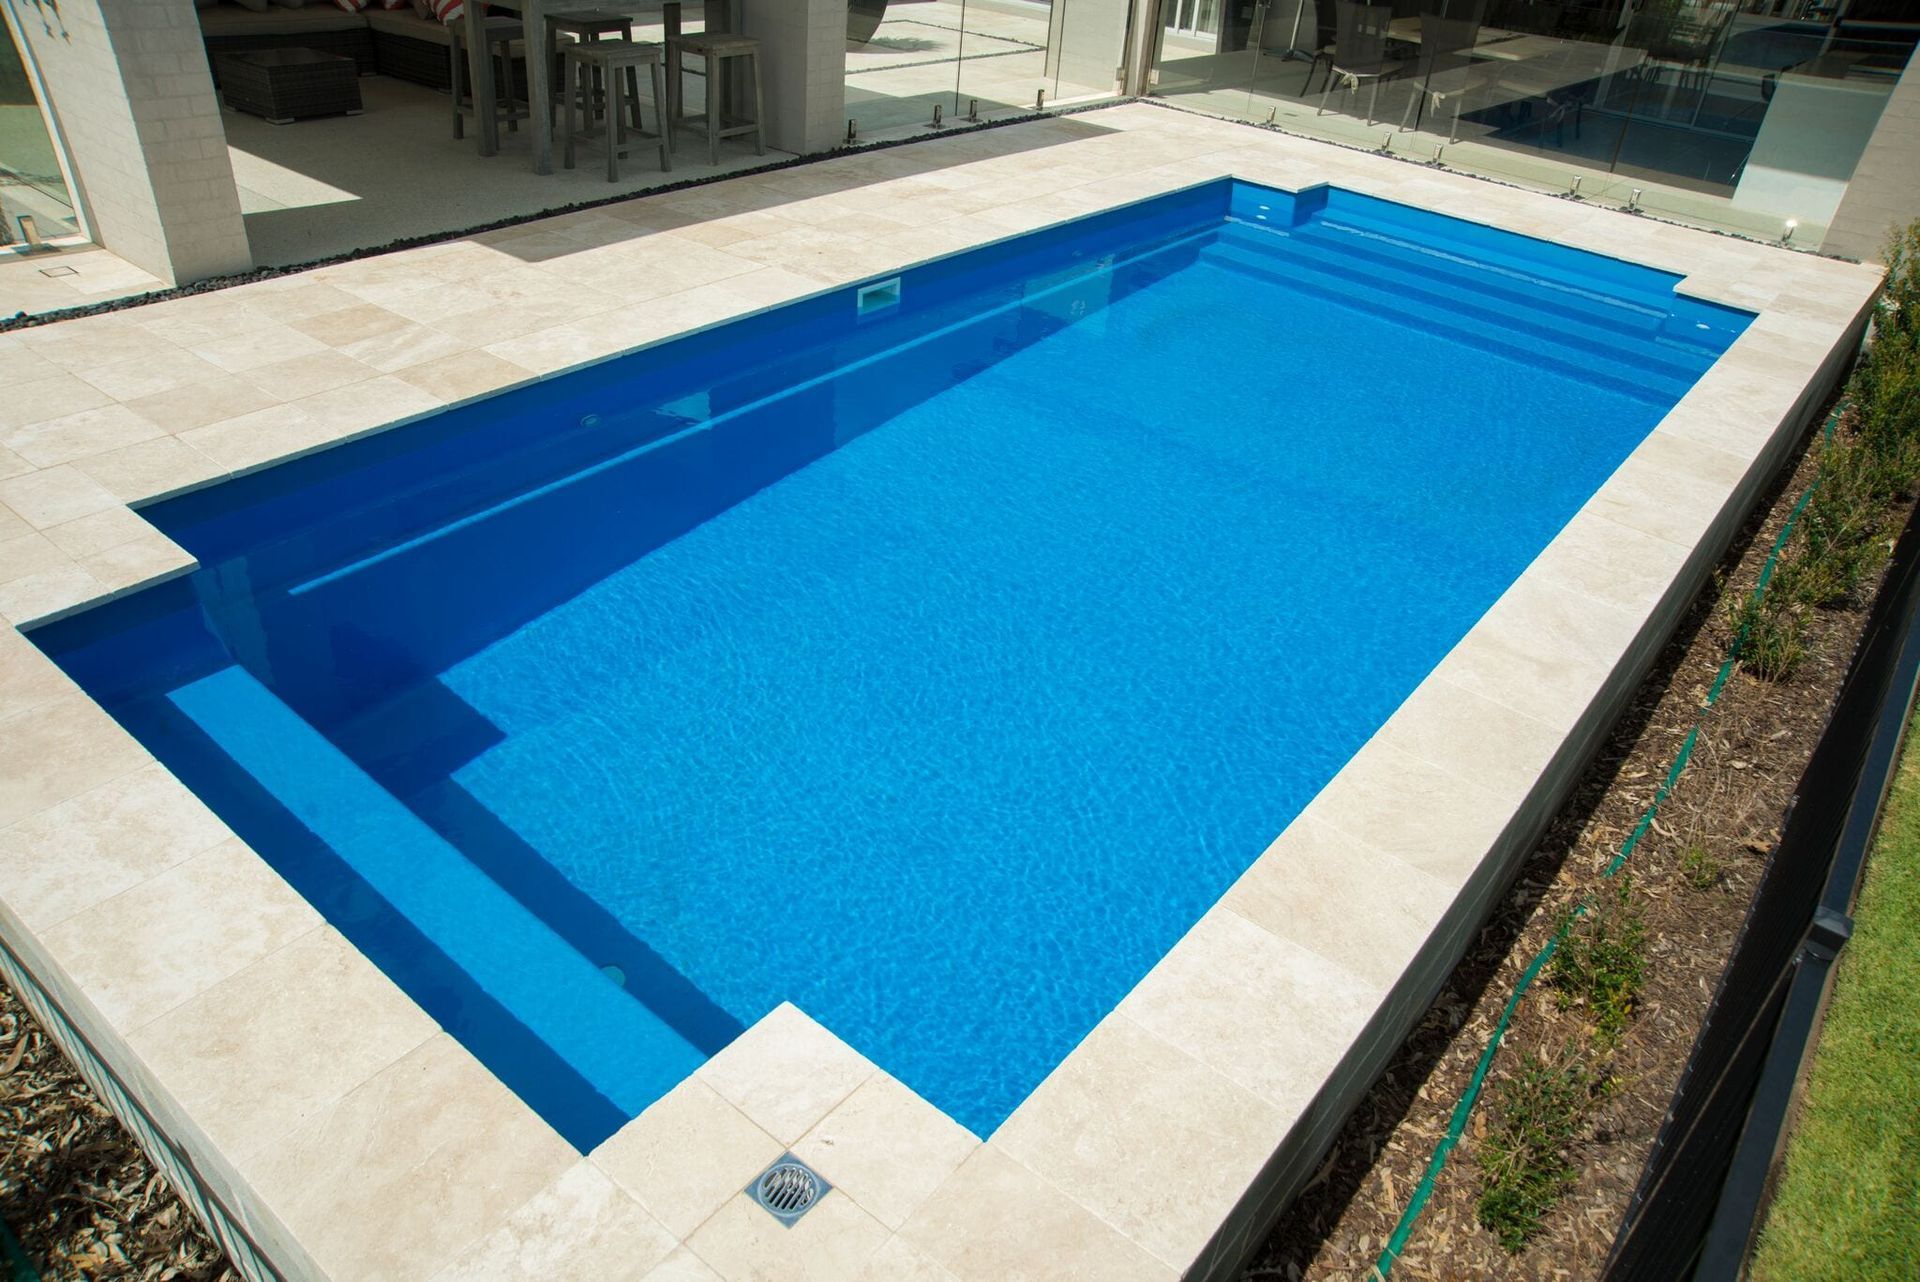 Classic Pool Design by Masterbuilt Pools in NSW